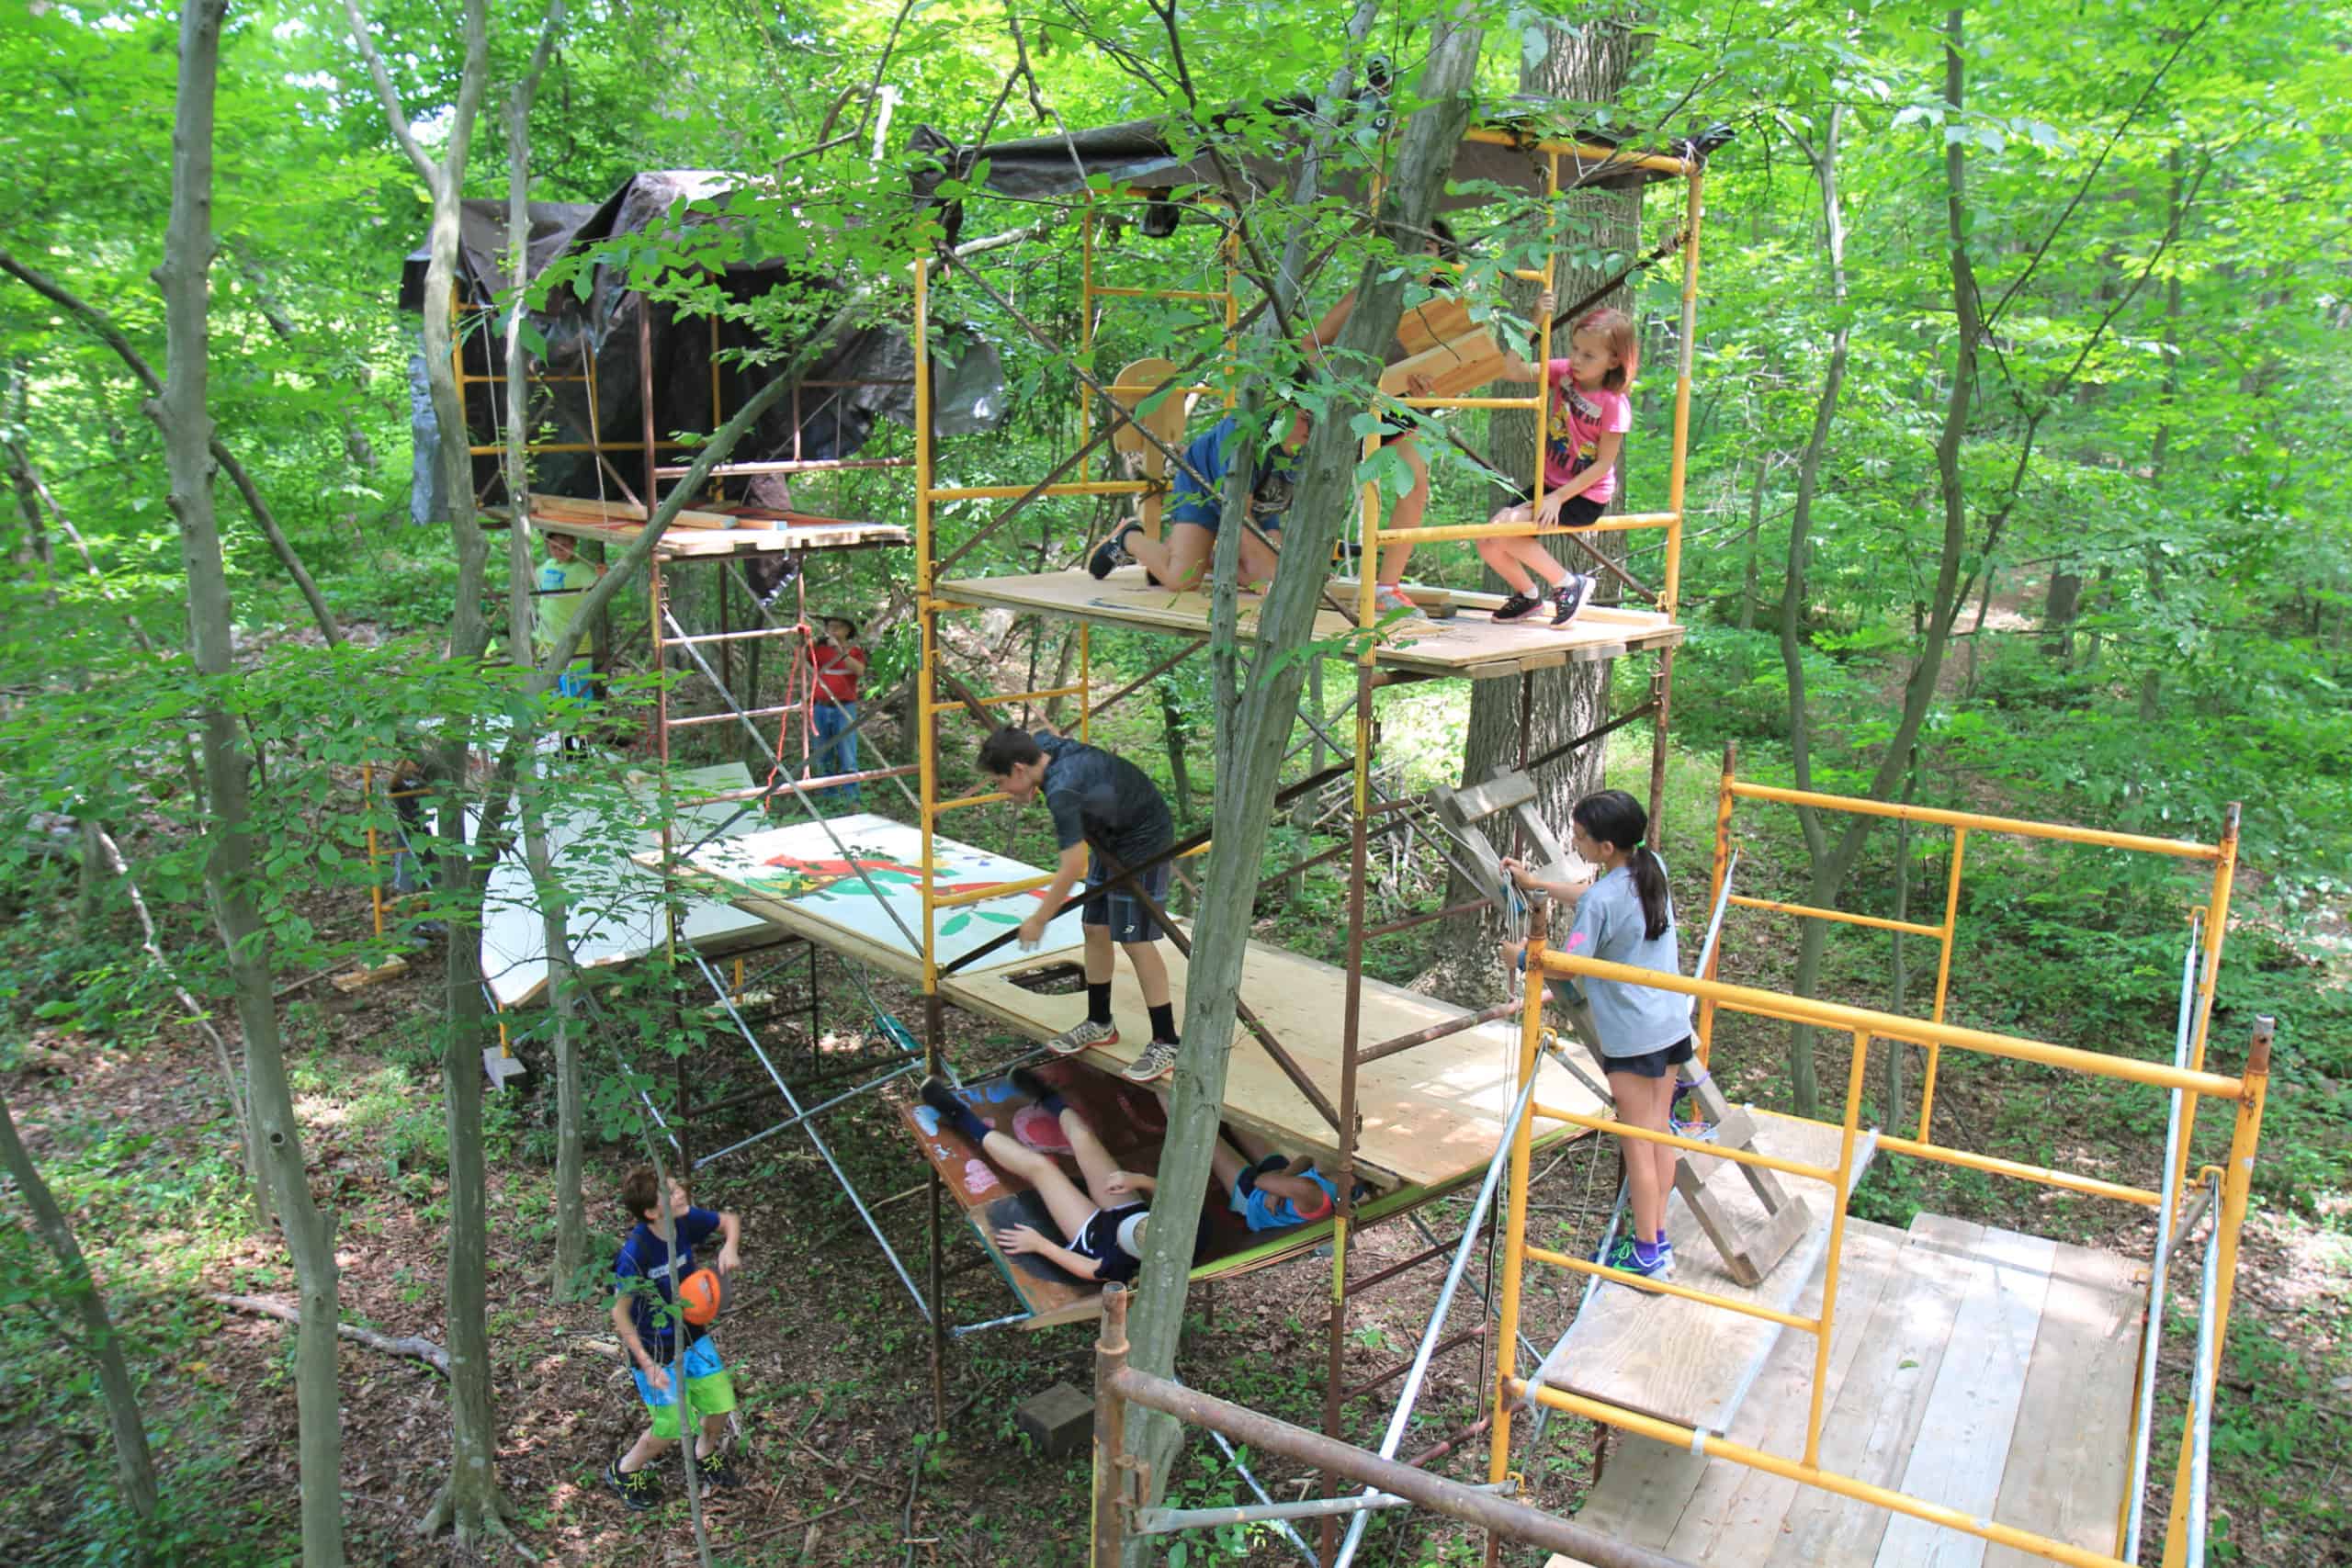 Kids playing on temporary treehouses in the woods at Crow's Nest Preserve.